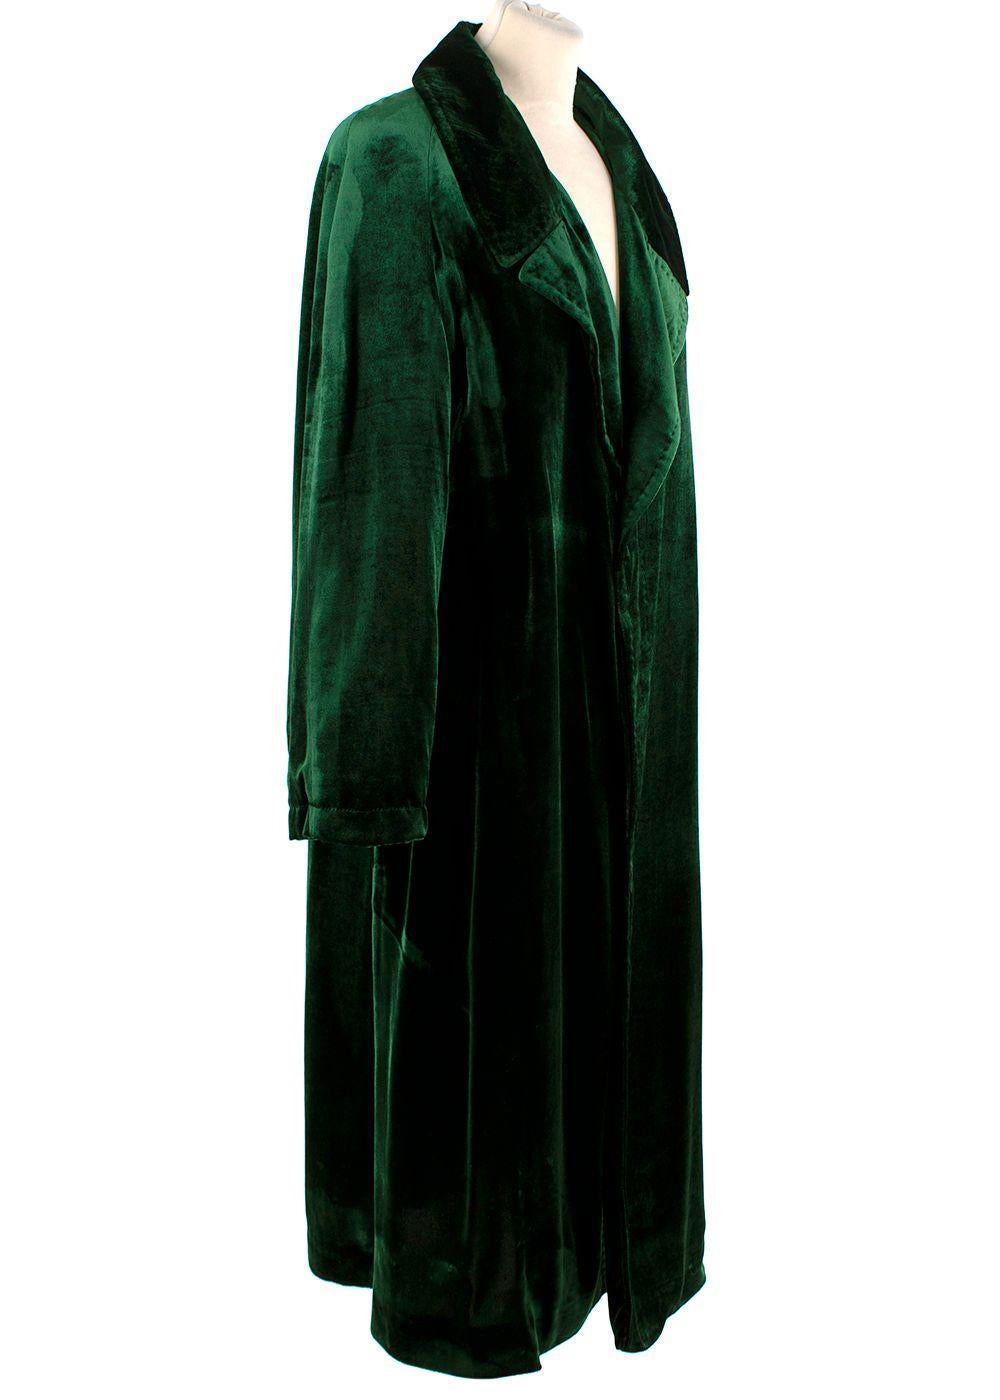 Haider Ackermann green velvet long peignoir raglan coat

- Emerald green crushed velvet coat
- Button-up closure
- Notched collar
- Partially lined
- Single vented

Materials:
82% Viscose
18% Silk

Made in Italy
Dry clean only

PLEASE NOTE, THESE